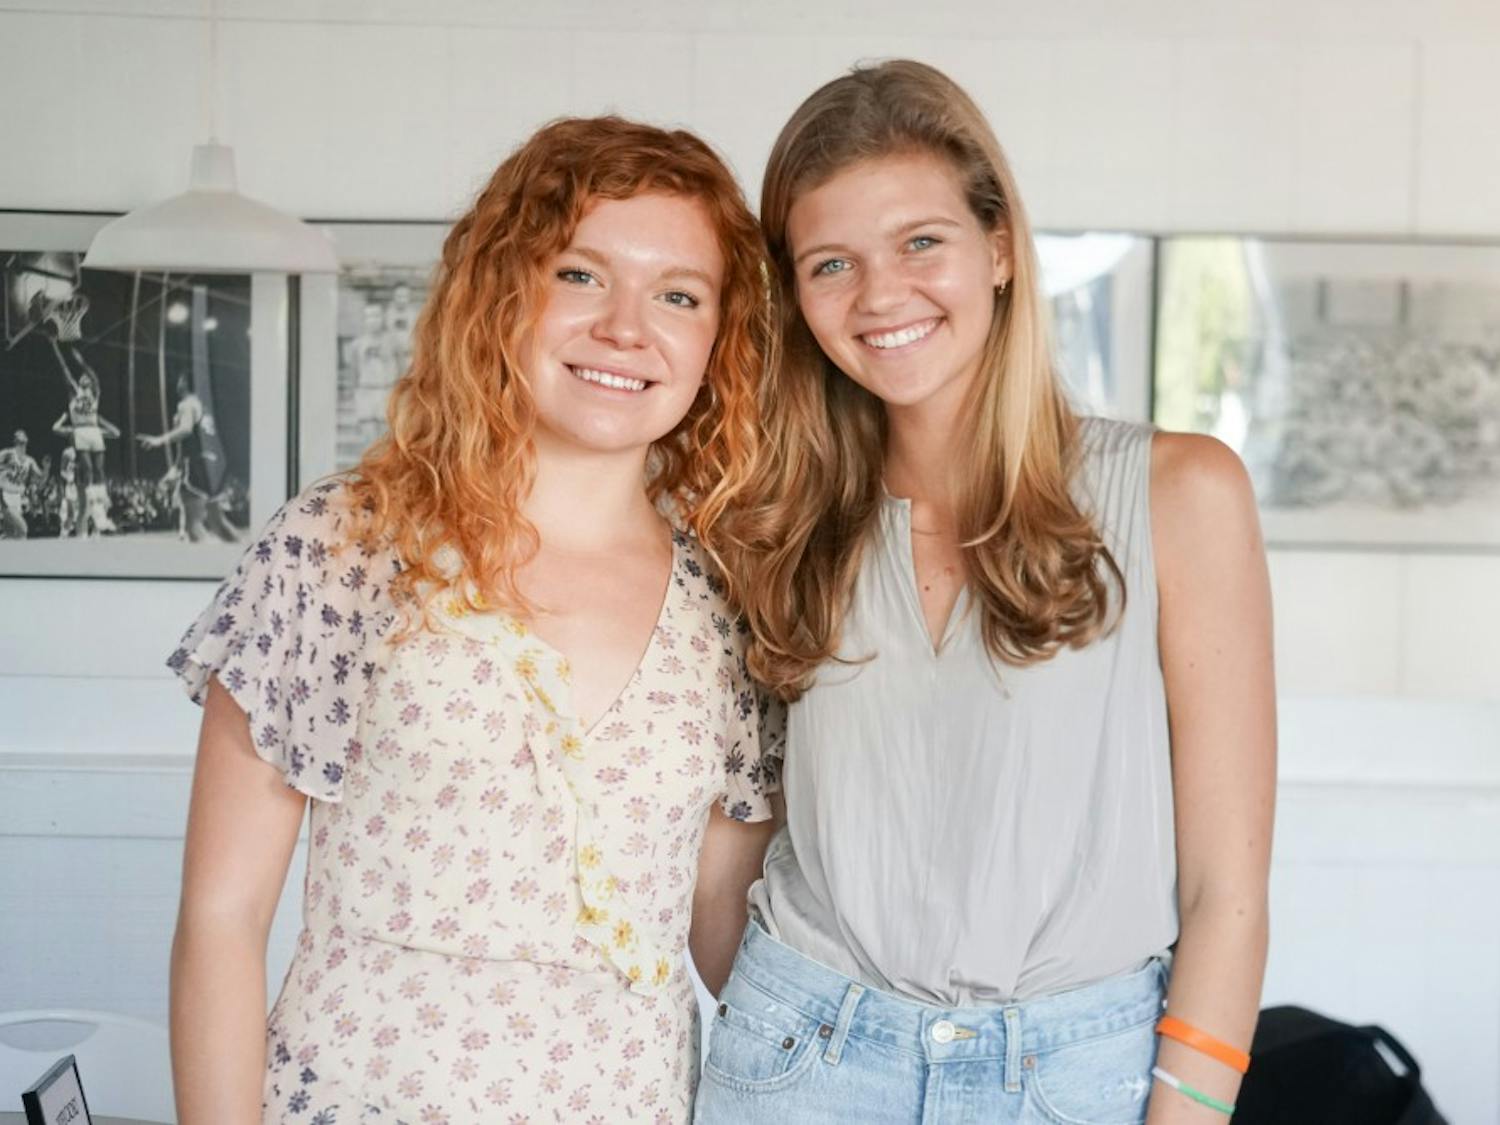 Sophomore Caroline Ciaramitaro (left), a business administration major, and junior Carlyle Rickenmann, a double major in advertising and political science, pose for a portrait on Thursday, Sept. 26, 2019. They are co-presidents of the Female Quotient club at UNC Chapel Hill that meets at 1789 Venture Lab.